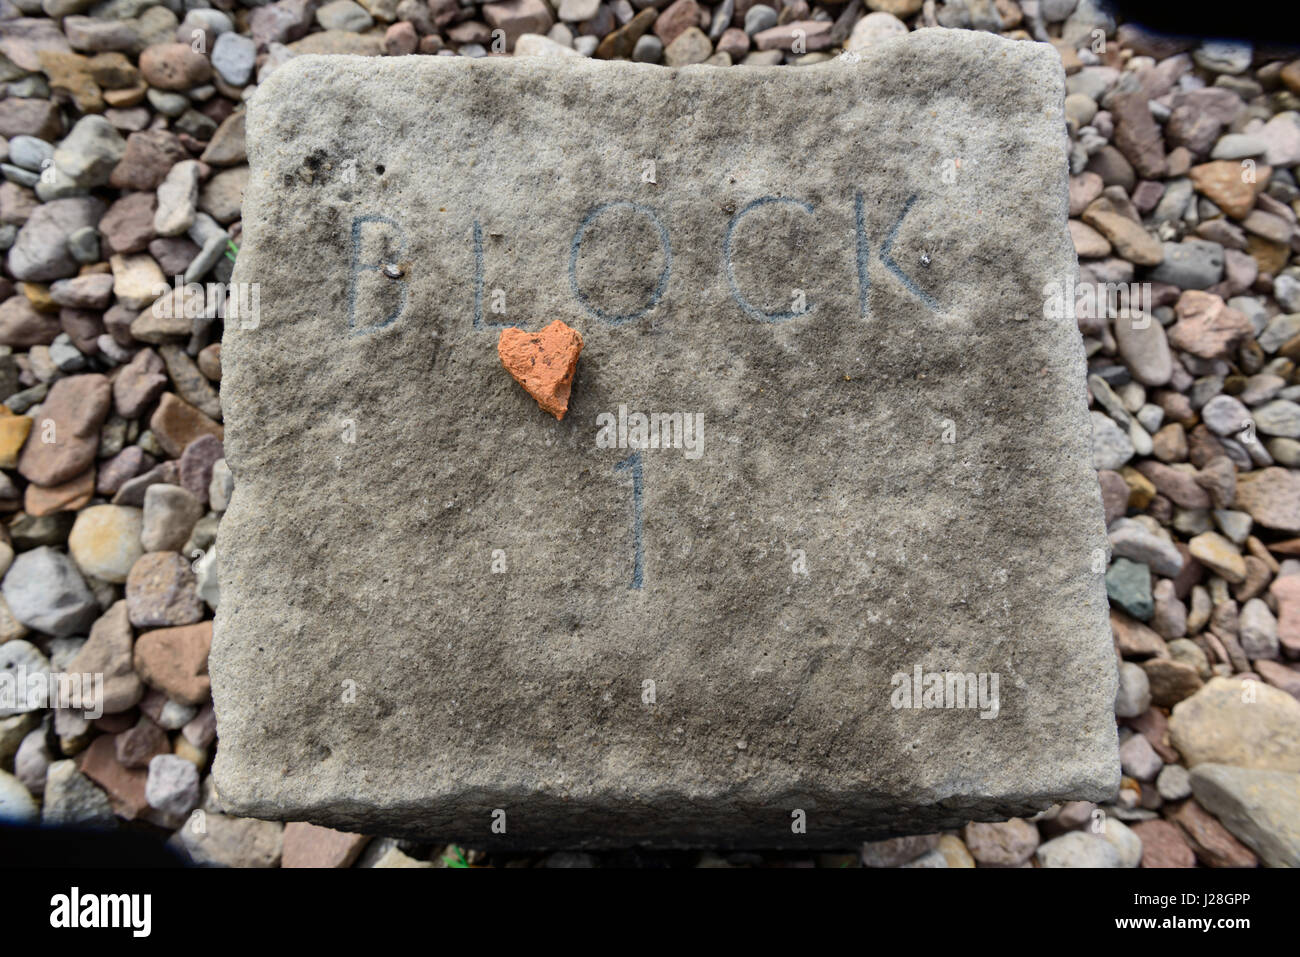 Small stone in the shape of a heart laid down on the place of block 1 in Buchenwald concentration camp memorial near Weimar, Germany. Stock Photo